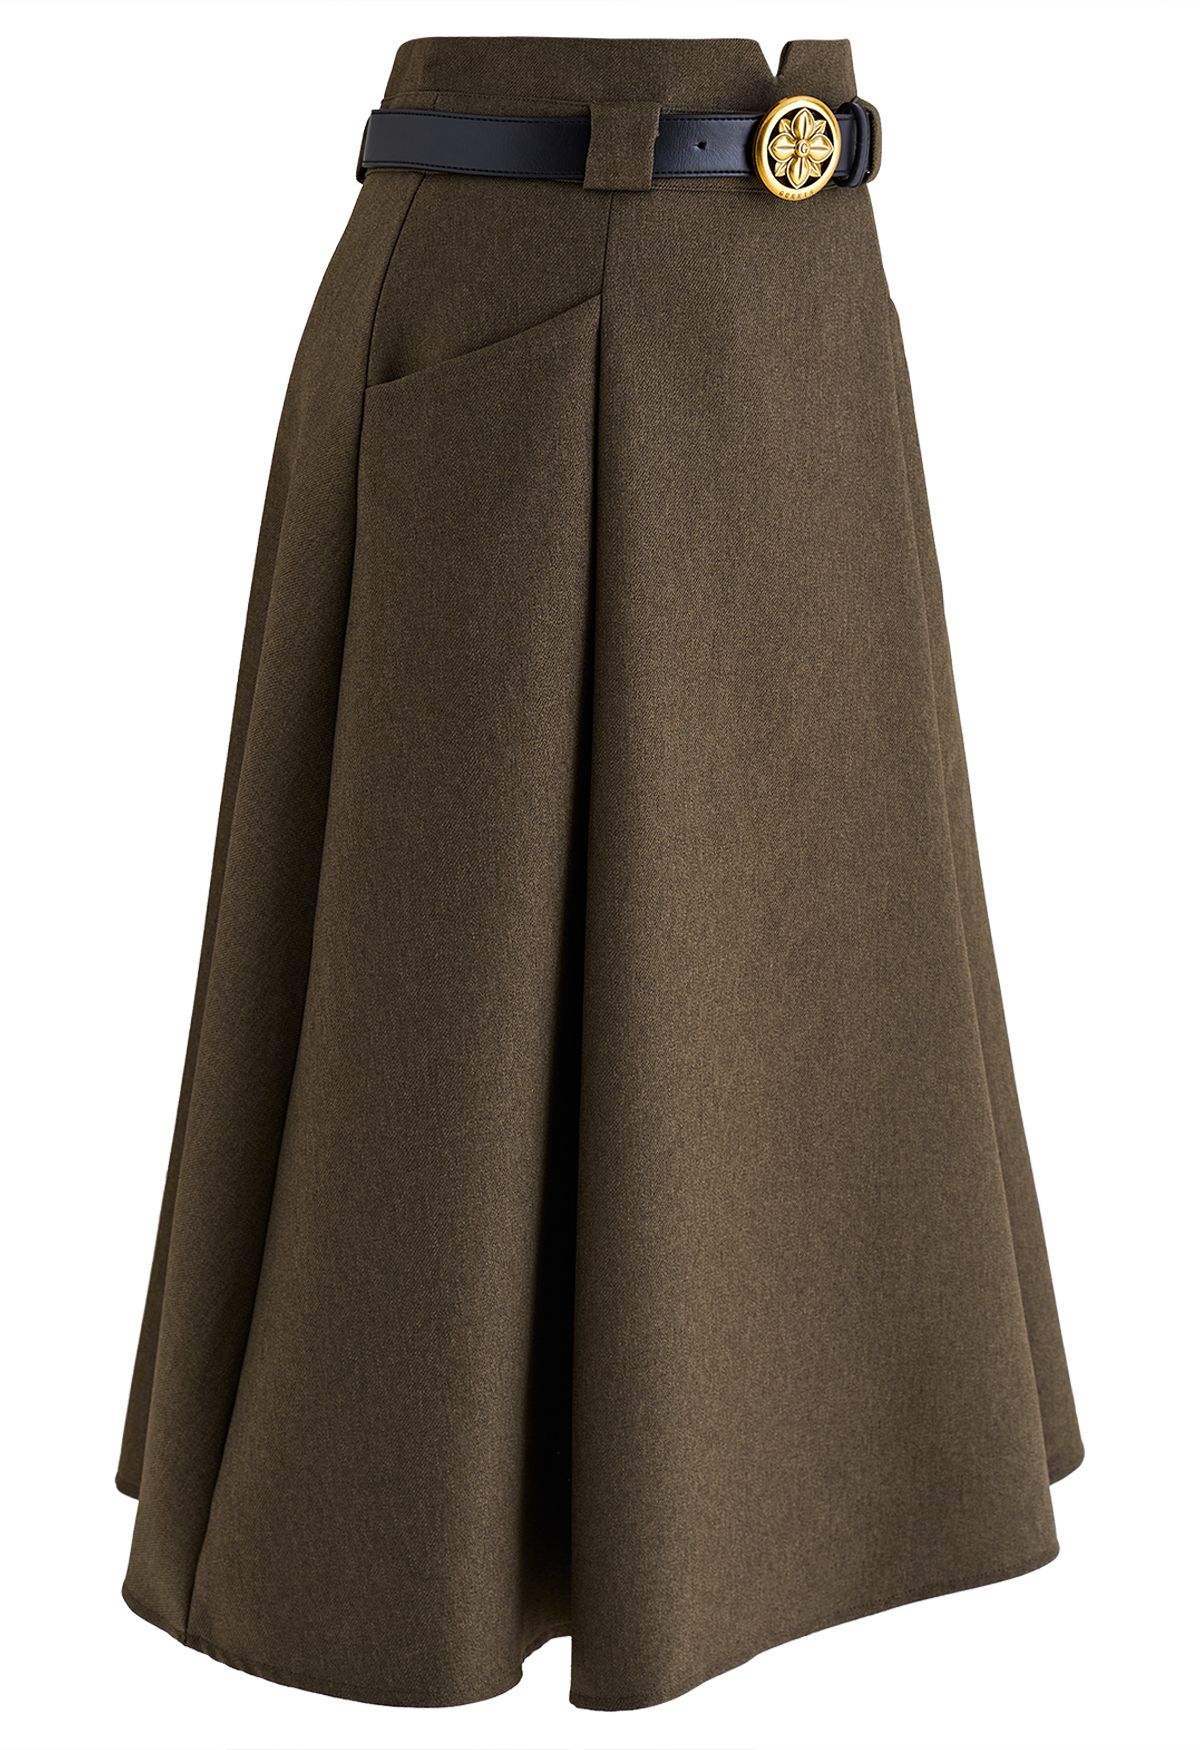 Belted Front Pocket Pleated Midi Skirt in Moss Green